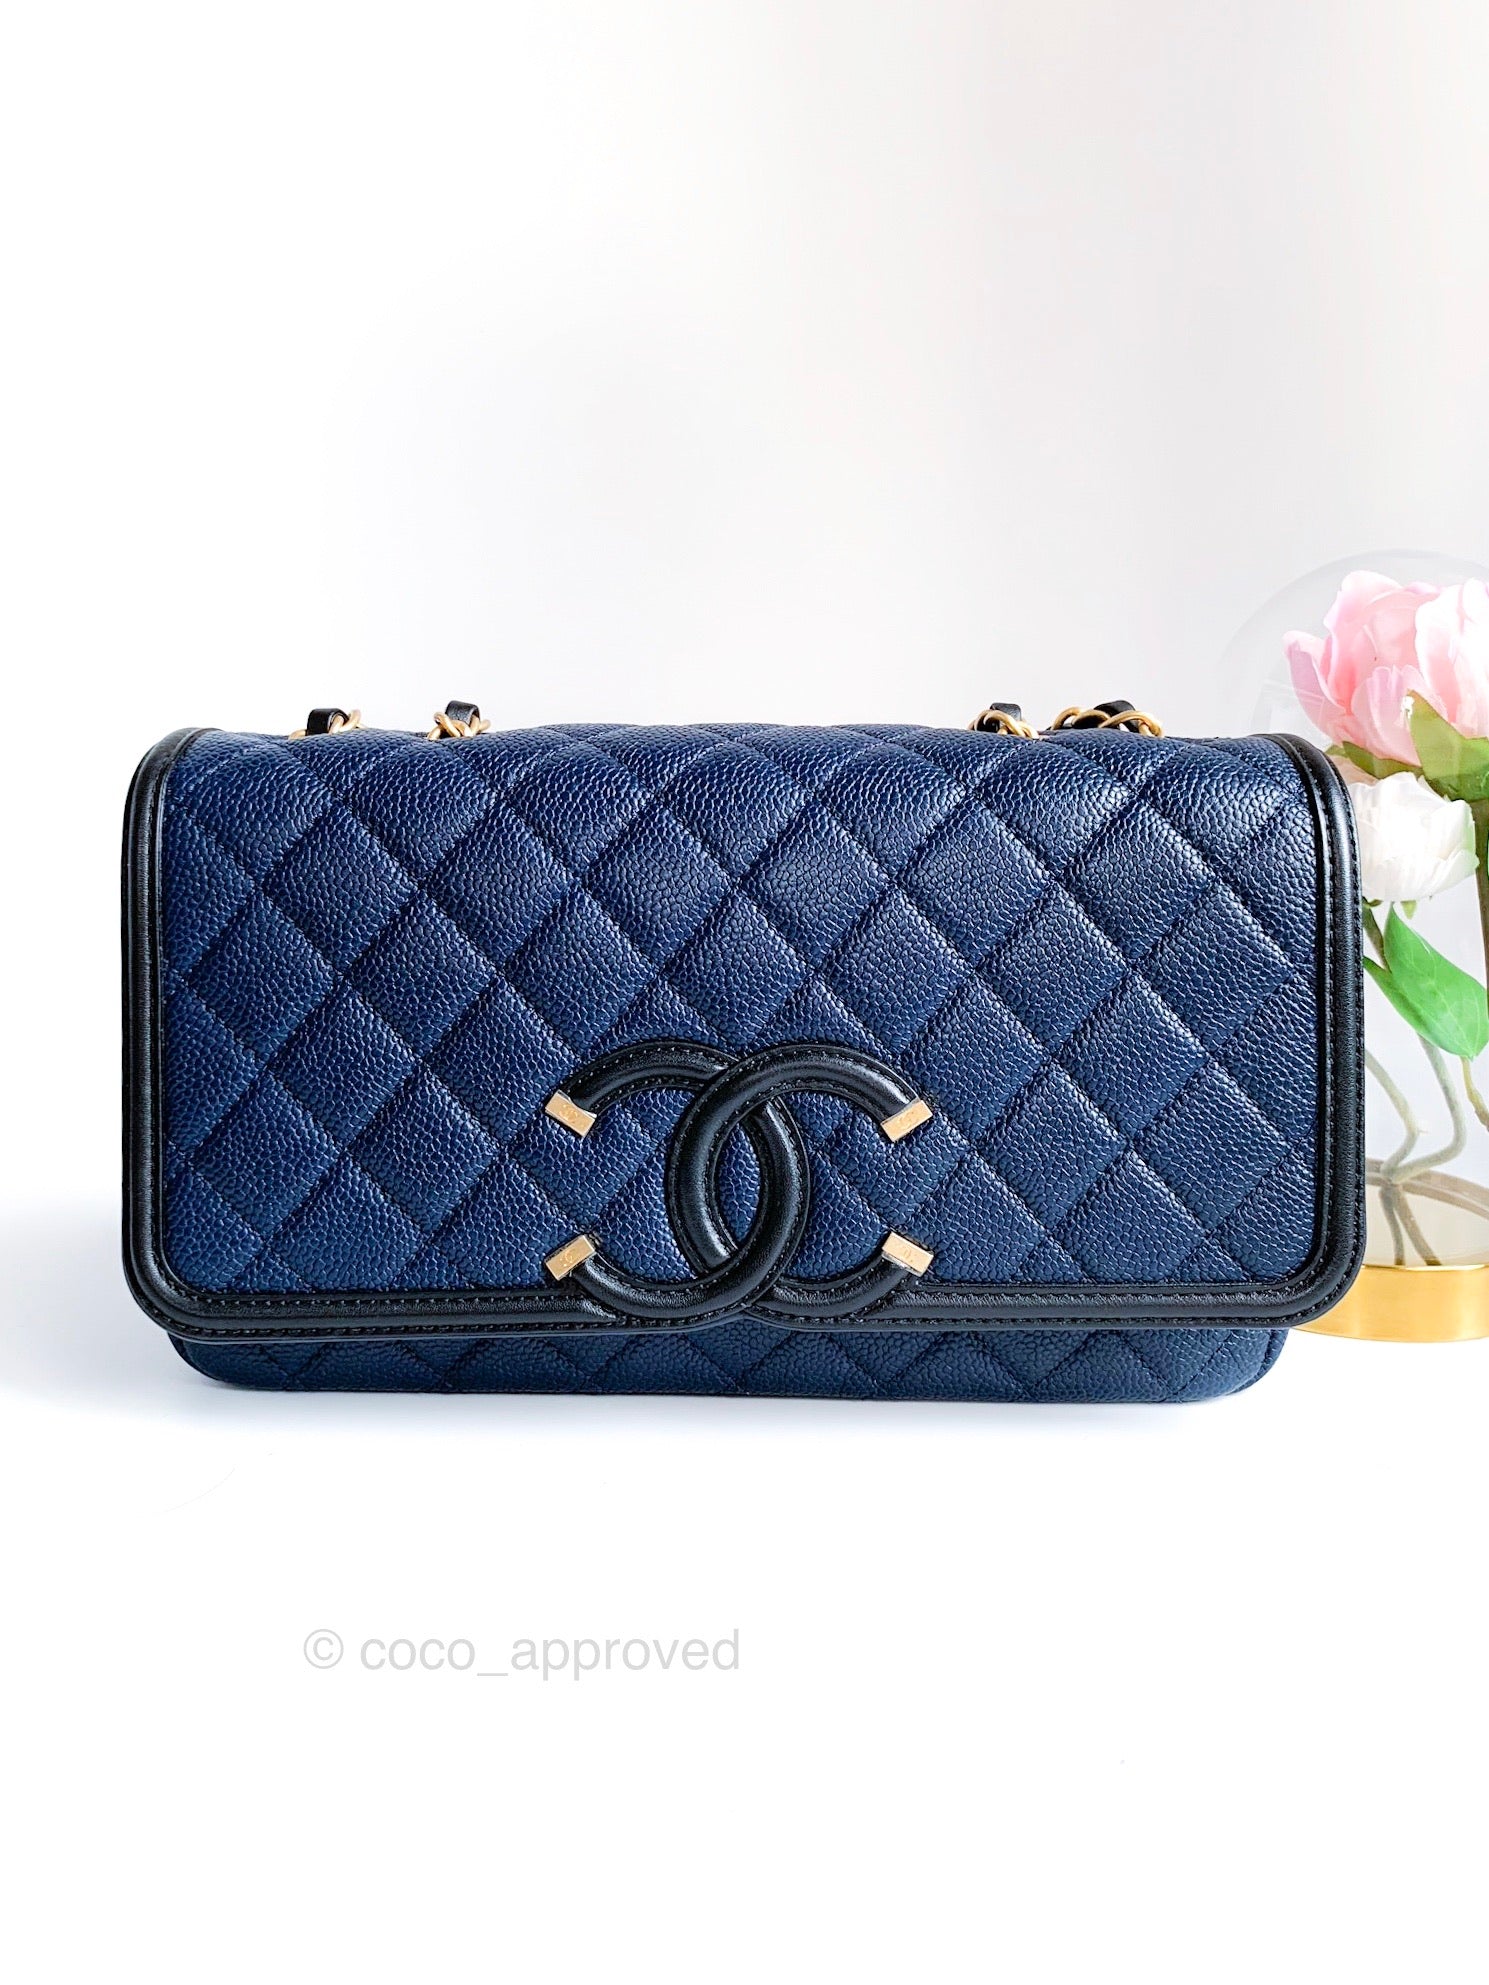 CHANEL CAVIAR CC QUILTED FILIGREE DOUBLE ZIP CLUTCH WALLET ON CHAIN  CROSSBODY